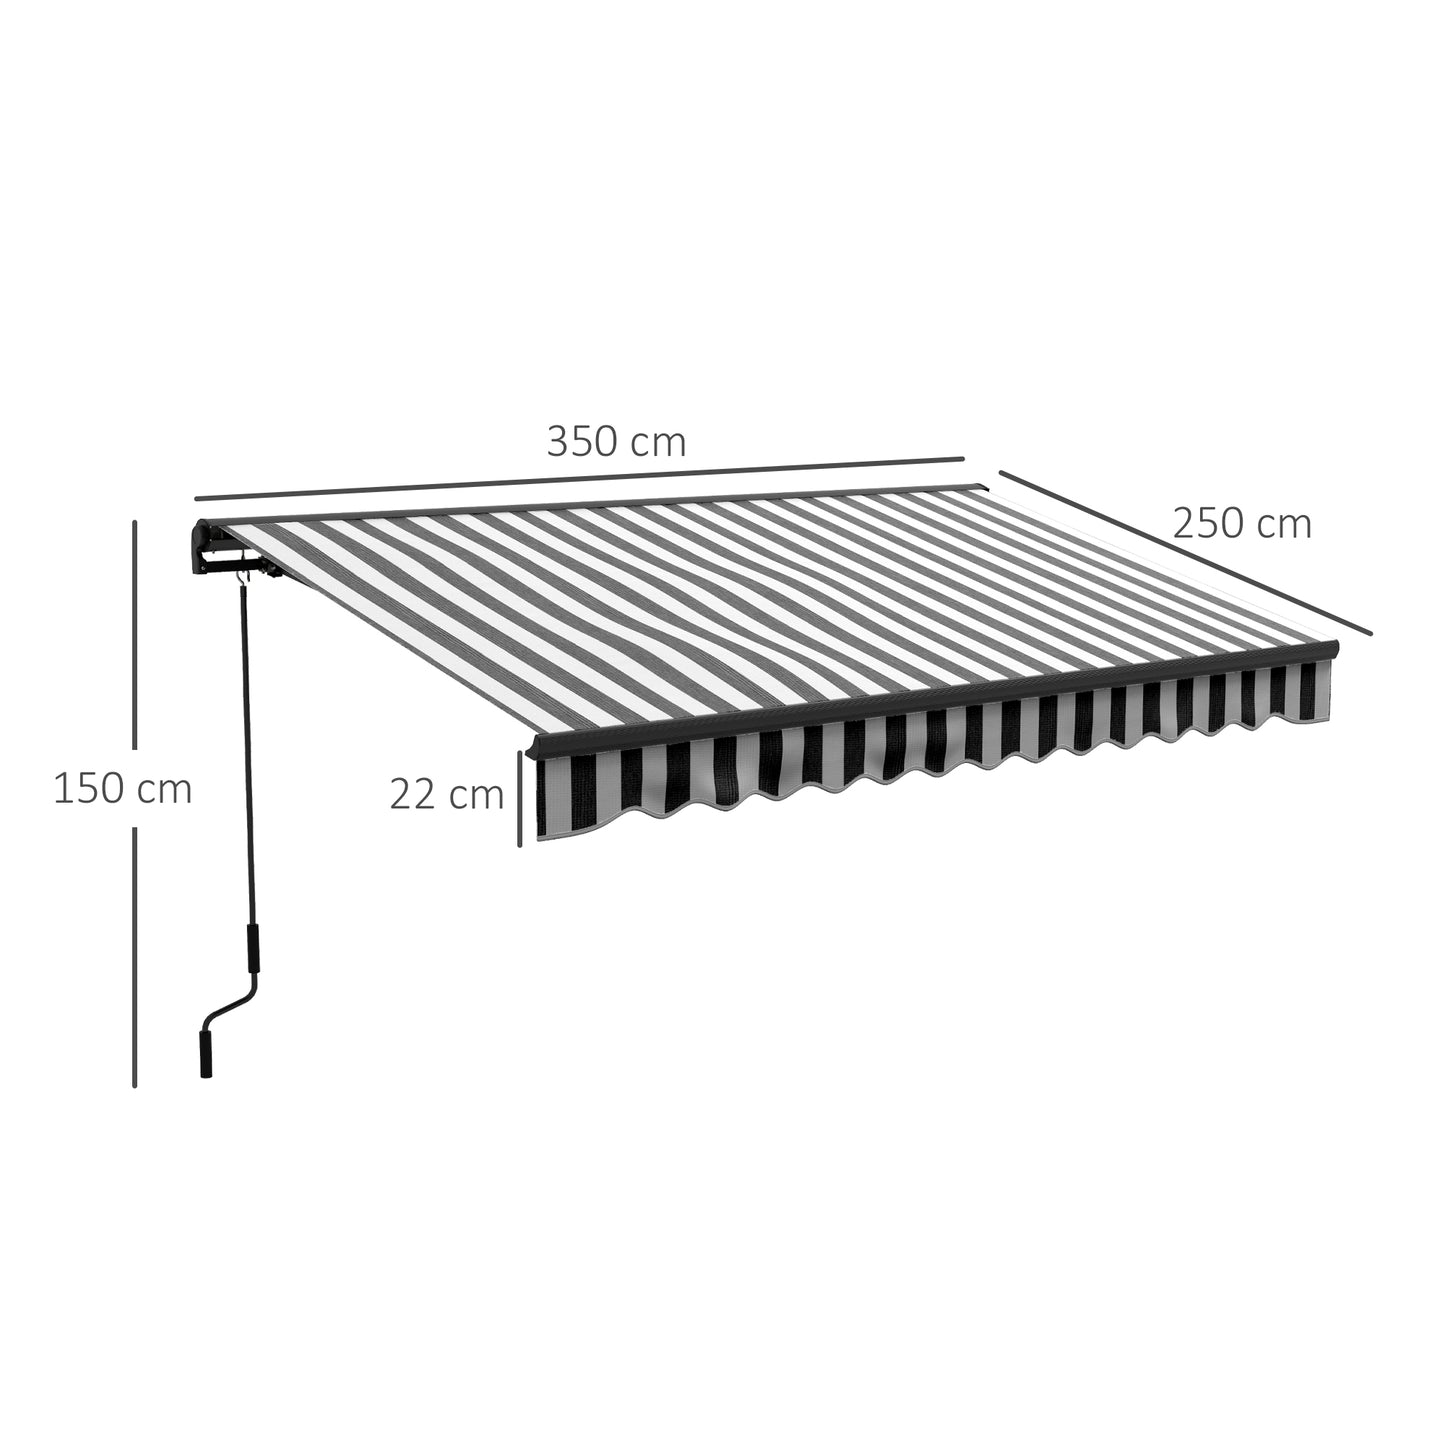 Outsunny 3.5 x 2.5m Aluminium Frame Electric Awning, Retractable Awning Sun Canopies for Patio Door Window, Grey and White